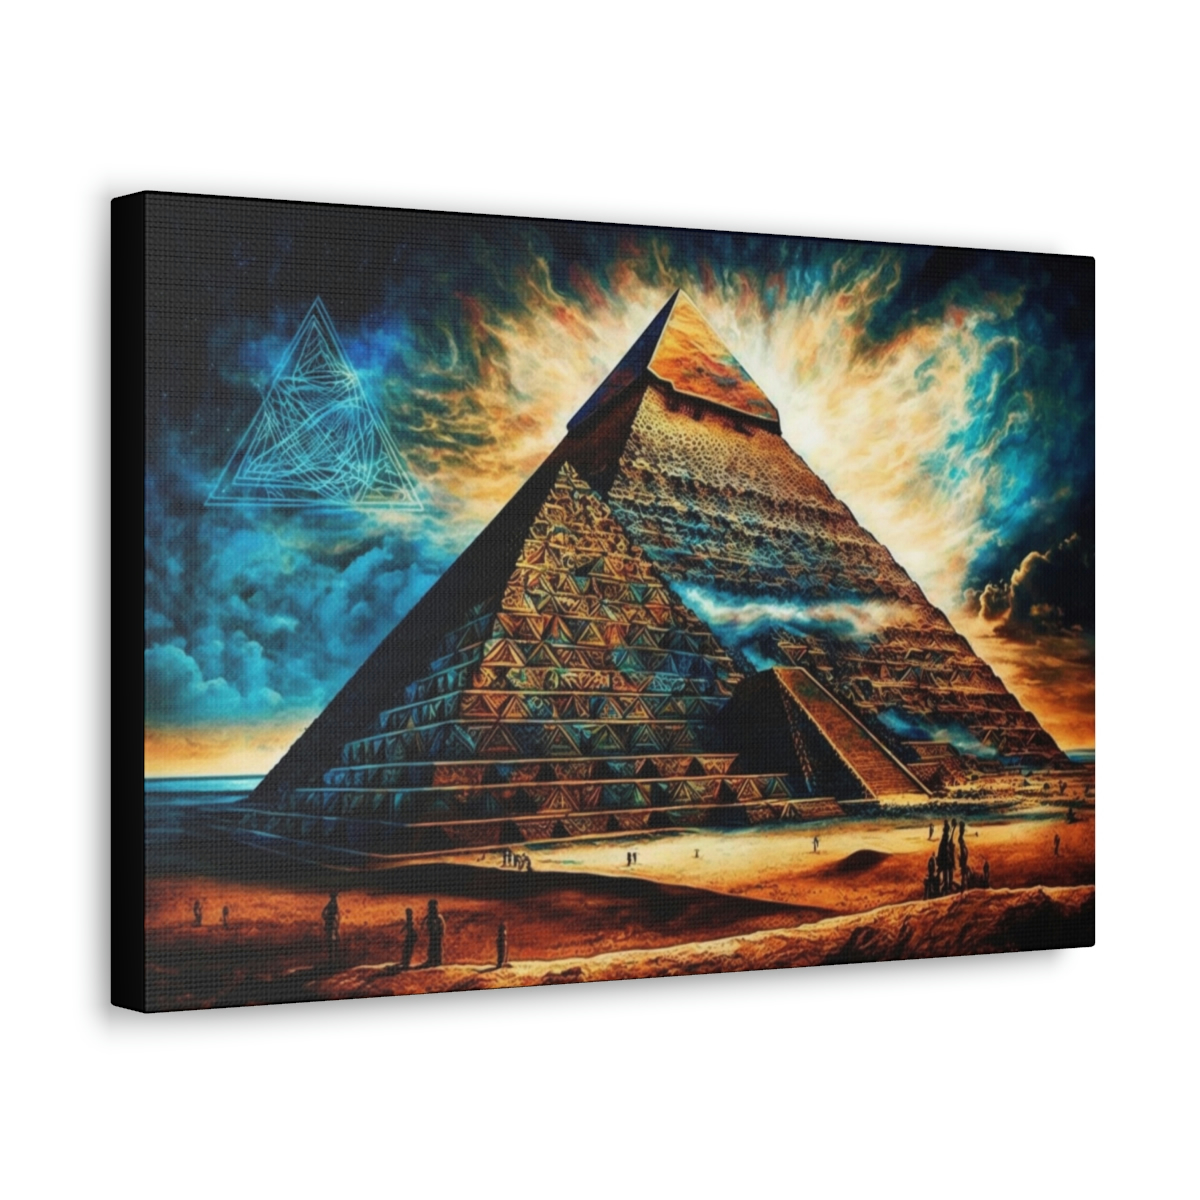 Trippy Art Canvas Print: The Wonder By Nile River